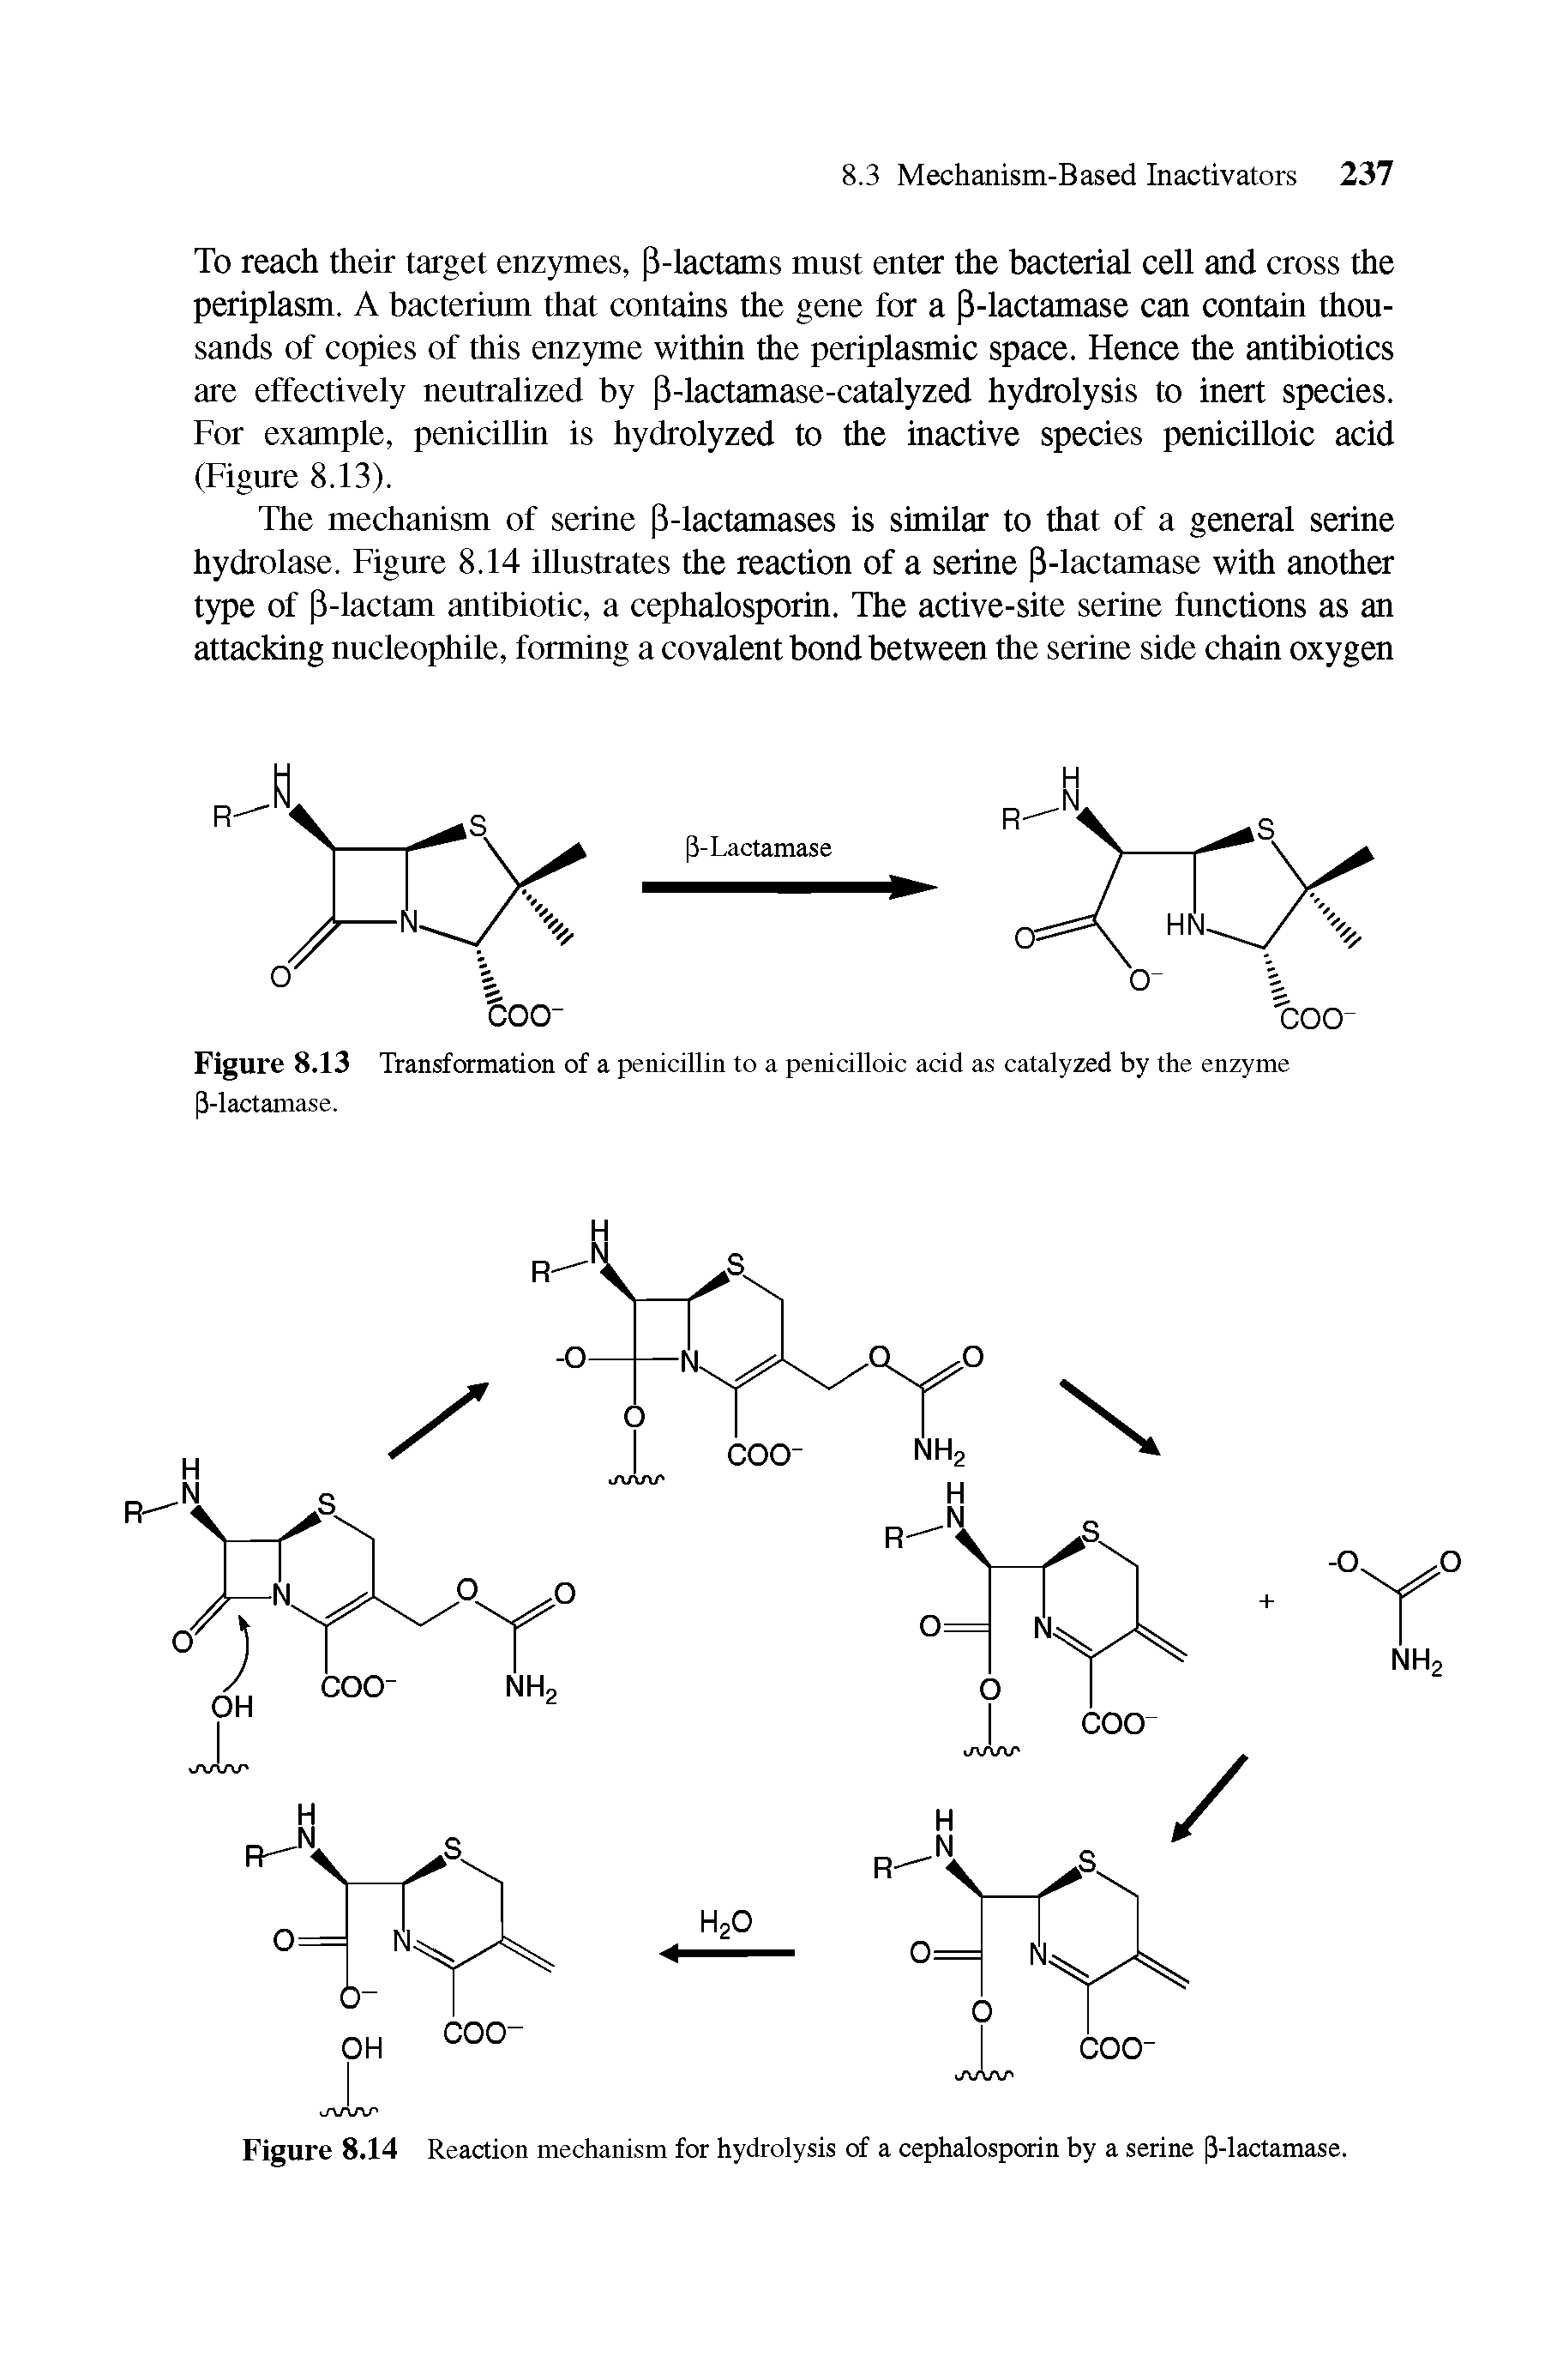 Figure 8.14 Reaction mechanism for hydrolysis of a cephalosporin by a serine 3-lactamase.